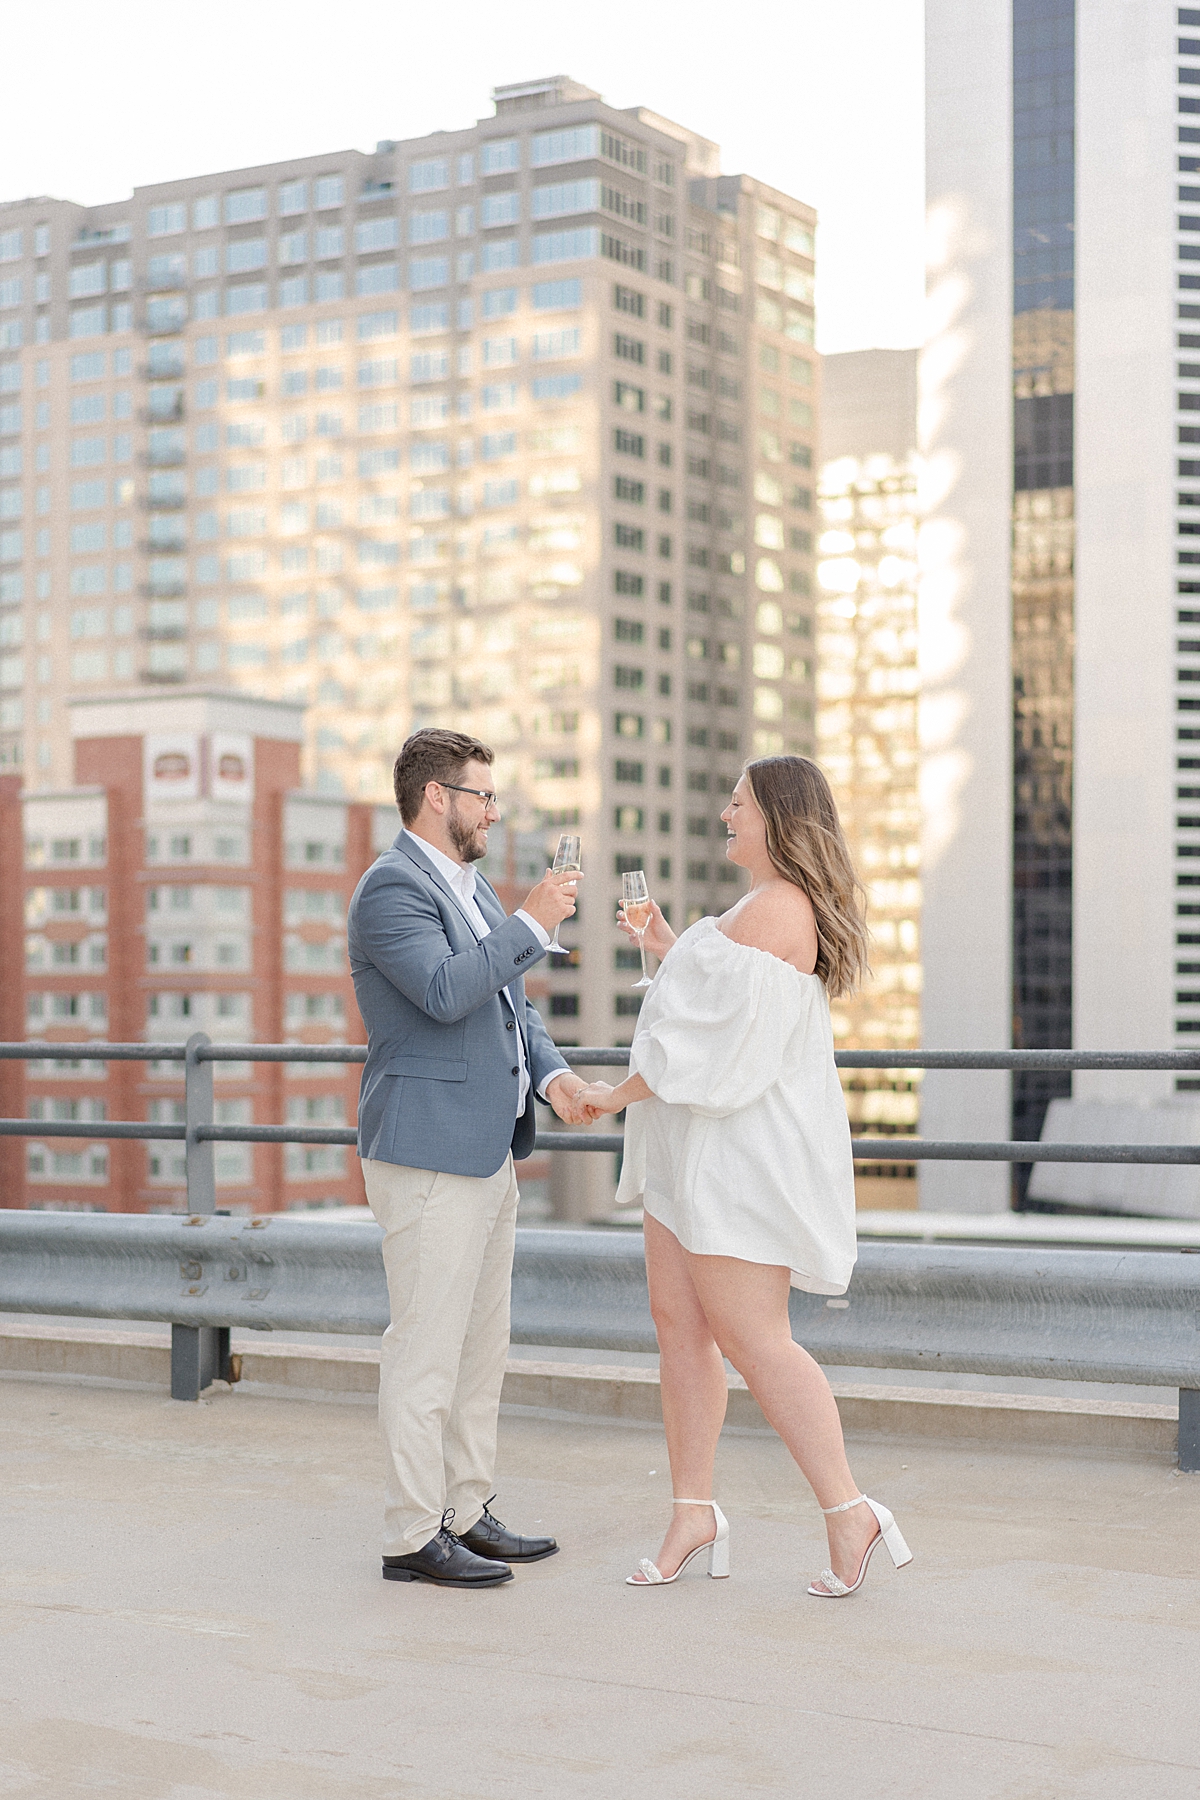 An engaged couple shares a glass of champagne on a rooftop with the Denver skyline